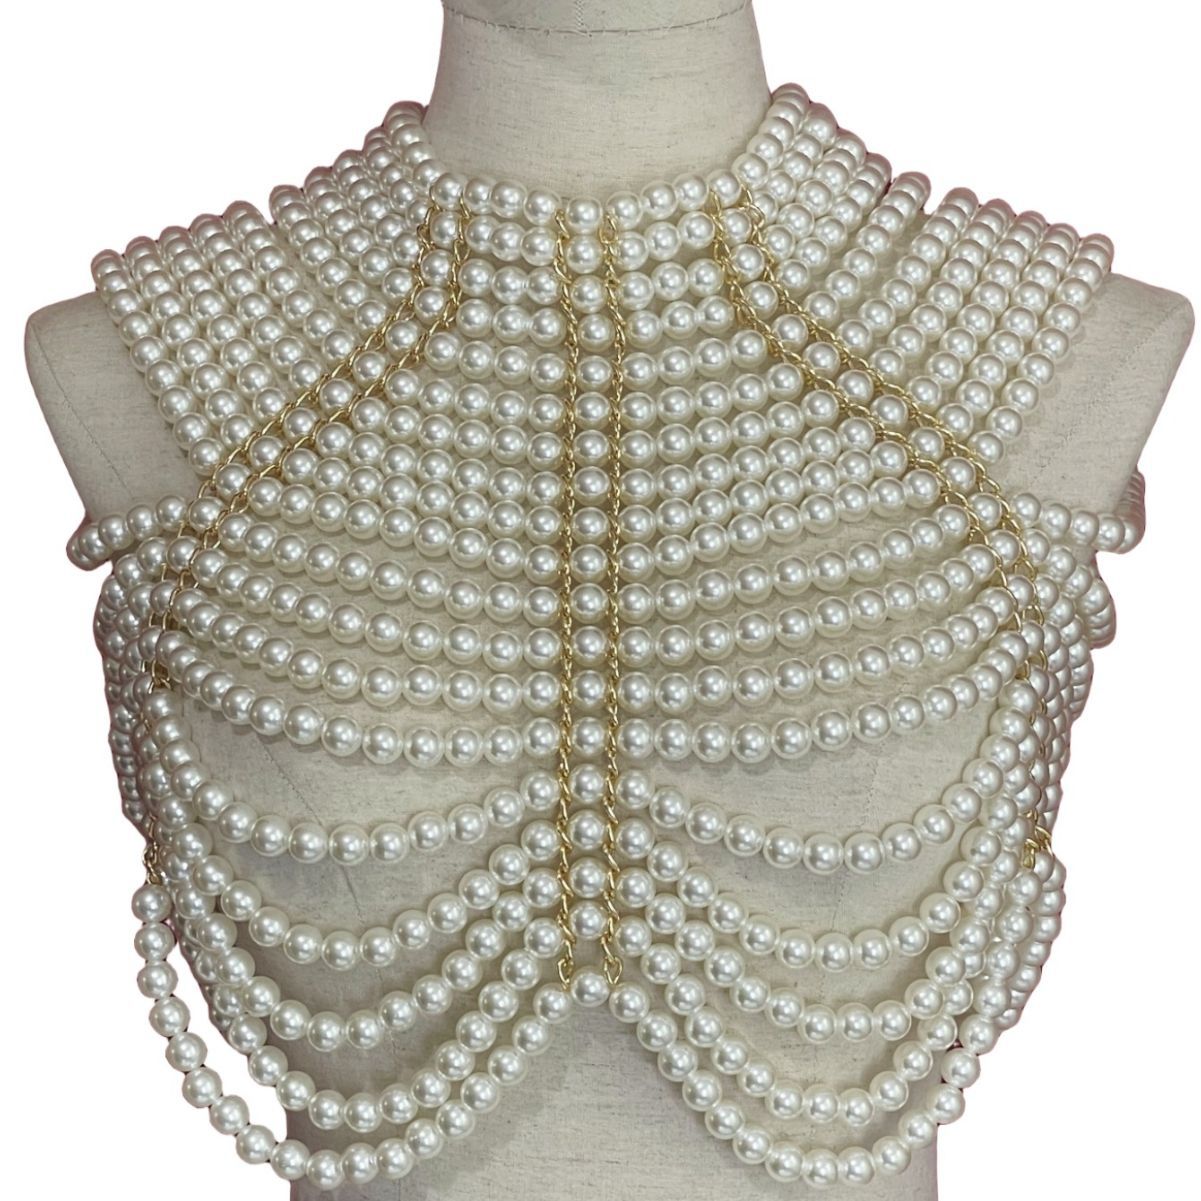 Pearl Body Cha Shoulder Chain Woven Shawl Handmade Formal Dress Accessories Necklace